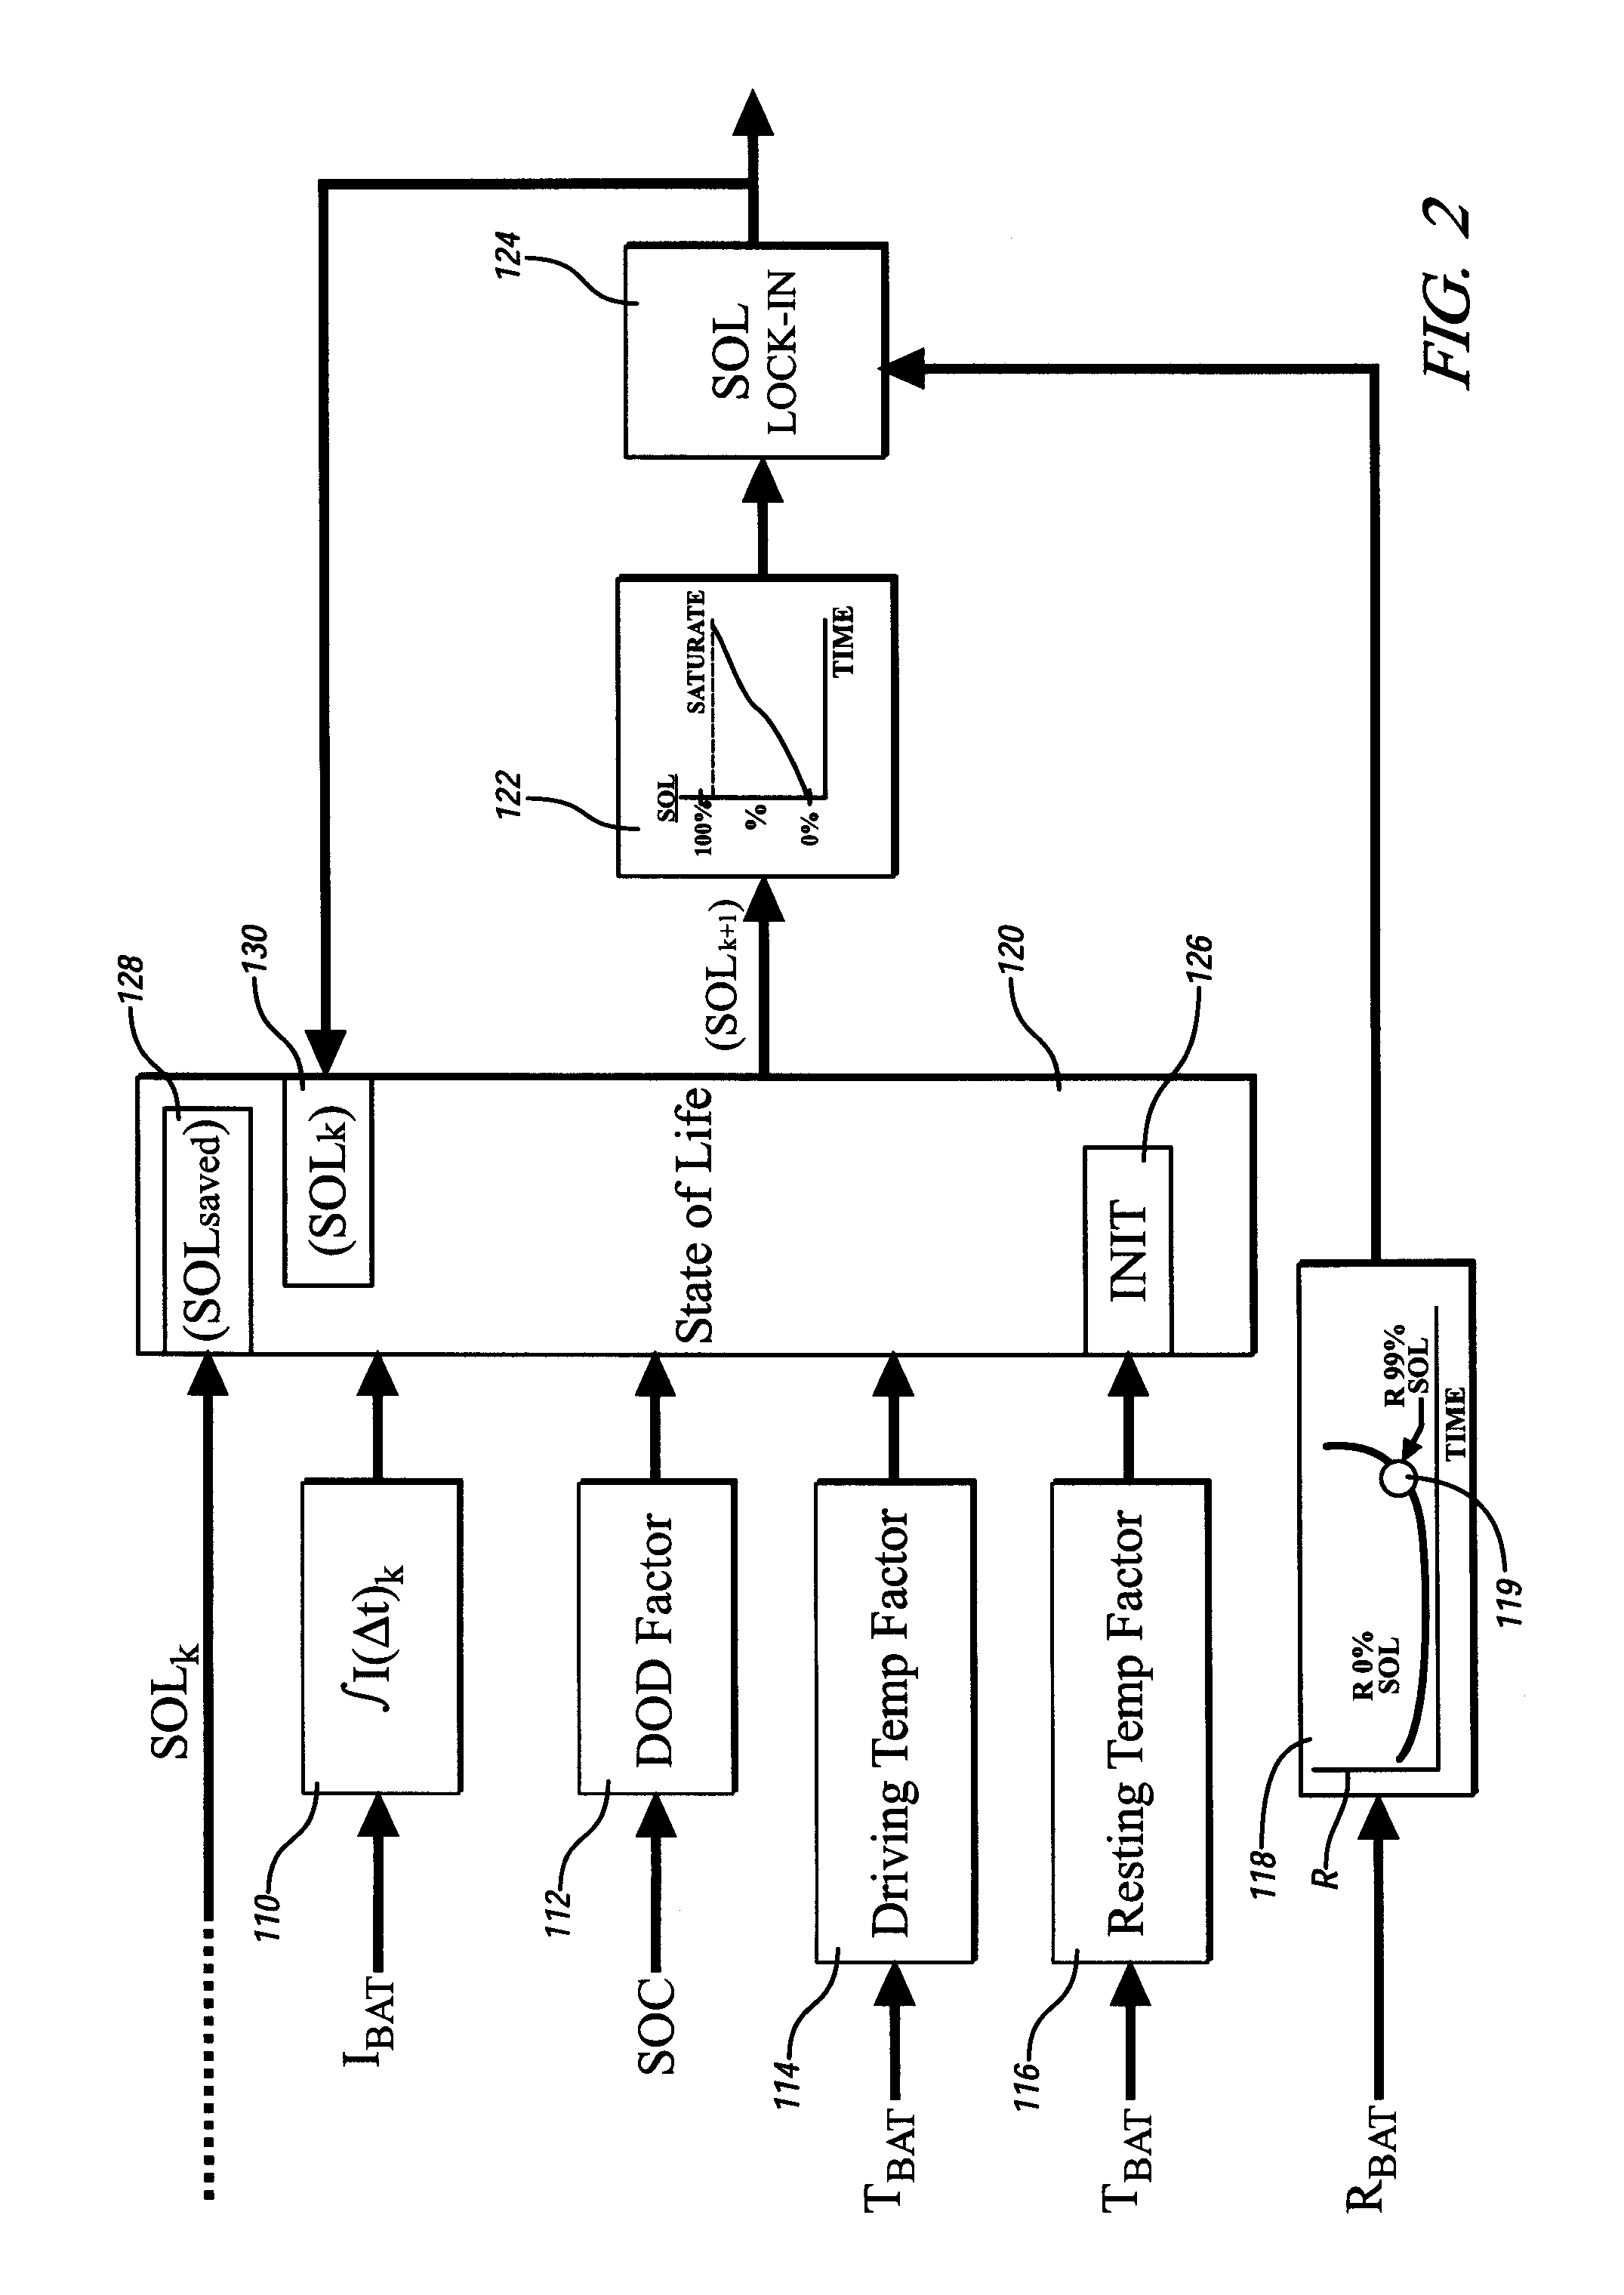 Method and apparatus for control of a hybrid electric vehicle to achieve a target life objective for an energy storage device